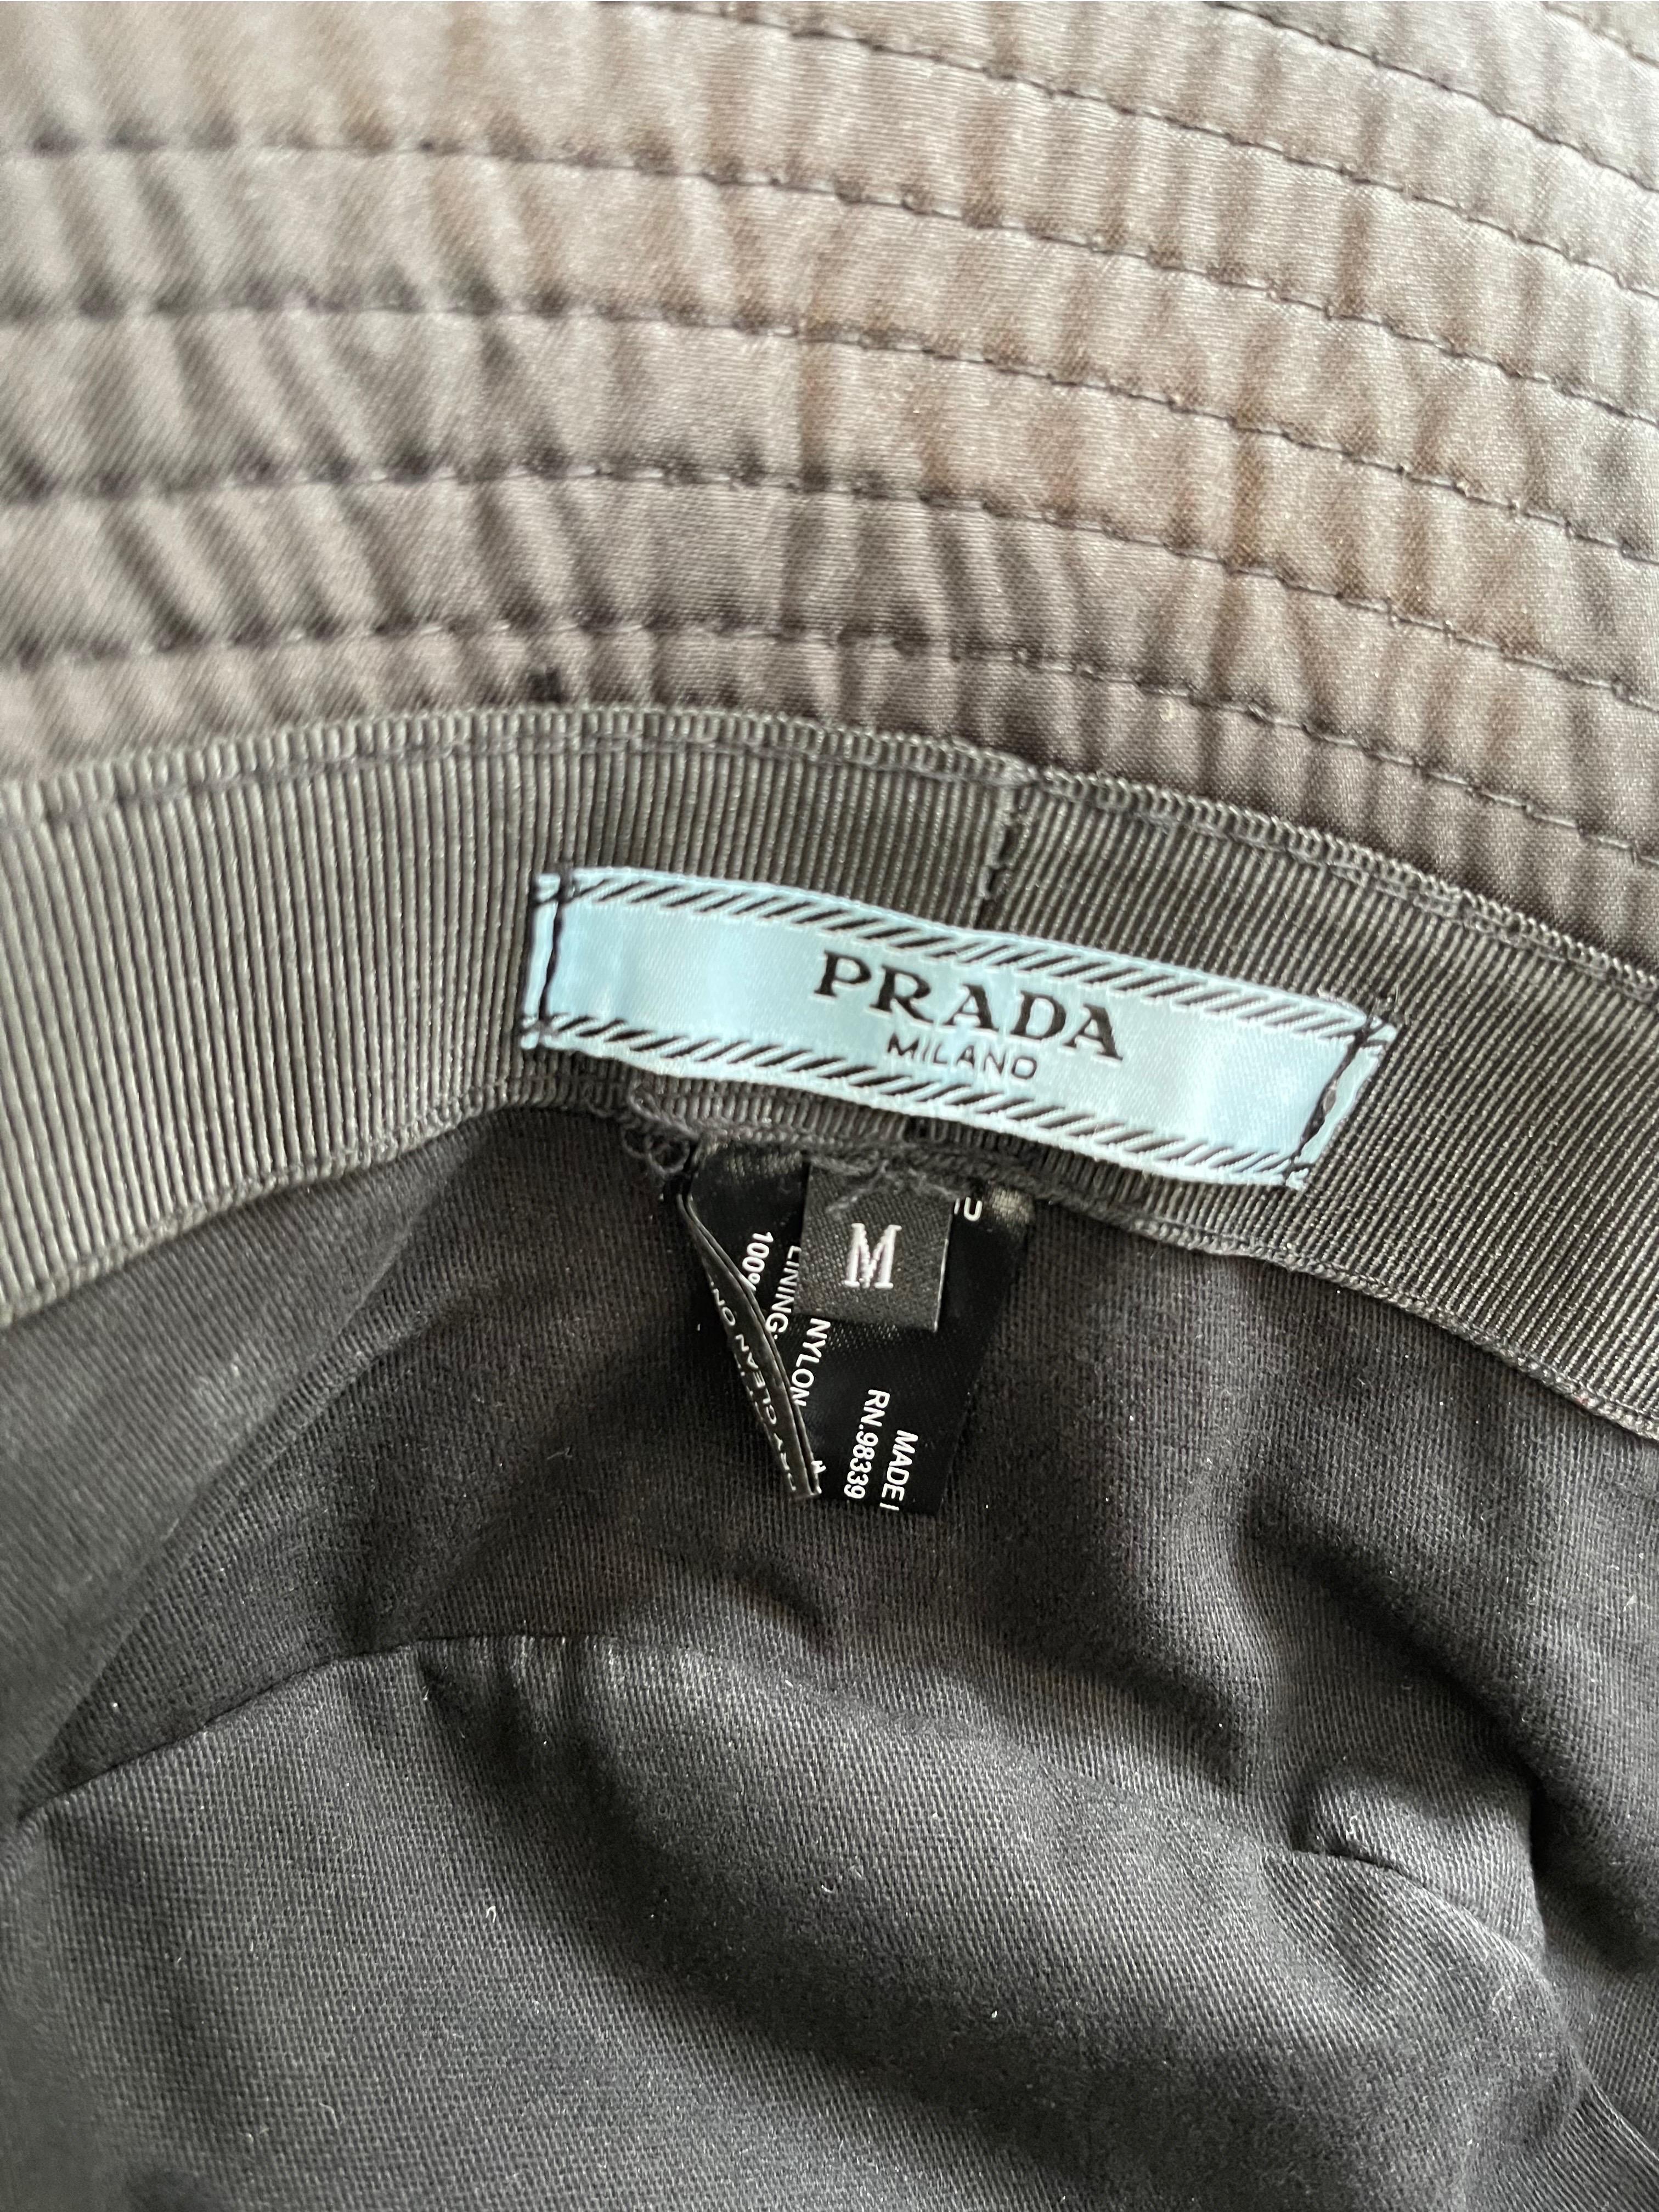 Rare early 2000s black 1990s style PRADA nylon unisex bucket hat ! Logo doesn’t come on the front anymore. Features silver and black upside down triangle logo at center front. 
In great unworn condition
Made in Italy
Marked Size